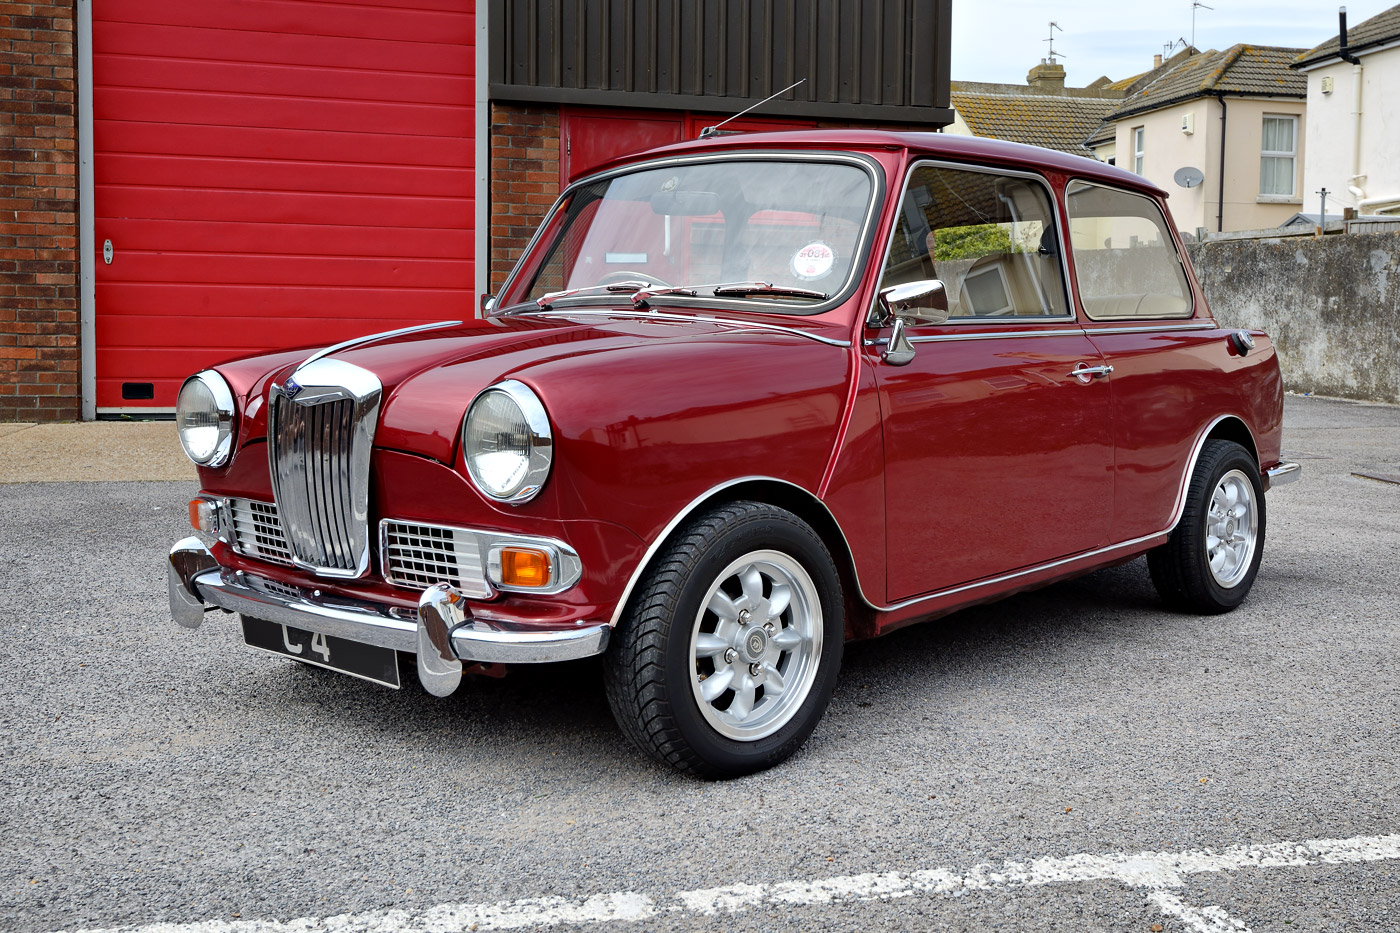 This 1968 Riley Elf Mk III Wood and Picket bare metal conversion with 1275cc GT engine is a beautiful example of how some custom performance work can turn a Riley Elf into a very desirable sports car. (Picture courtesy Lens Luther).